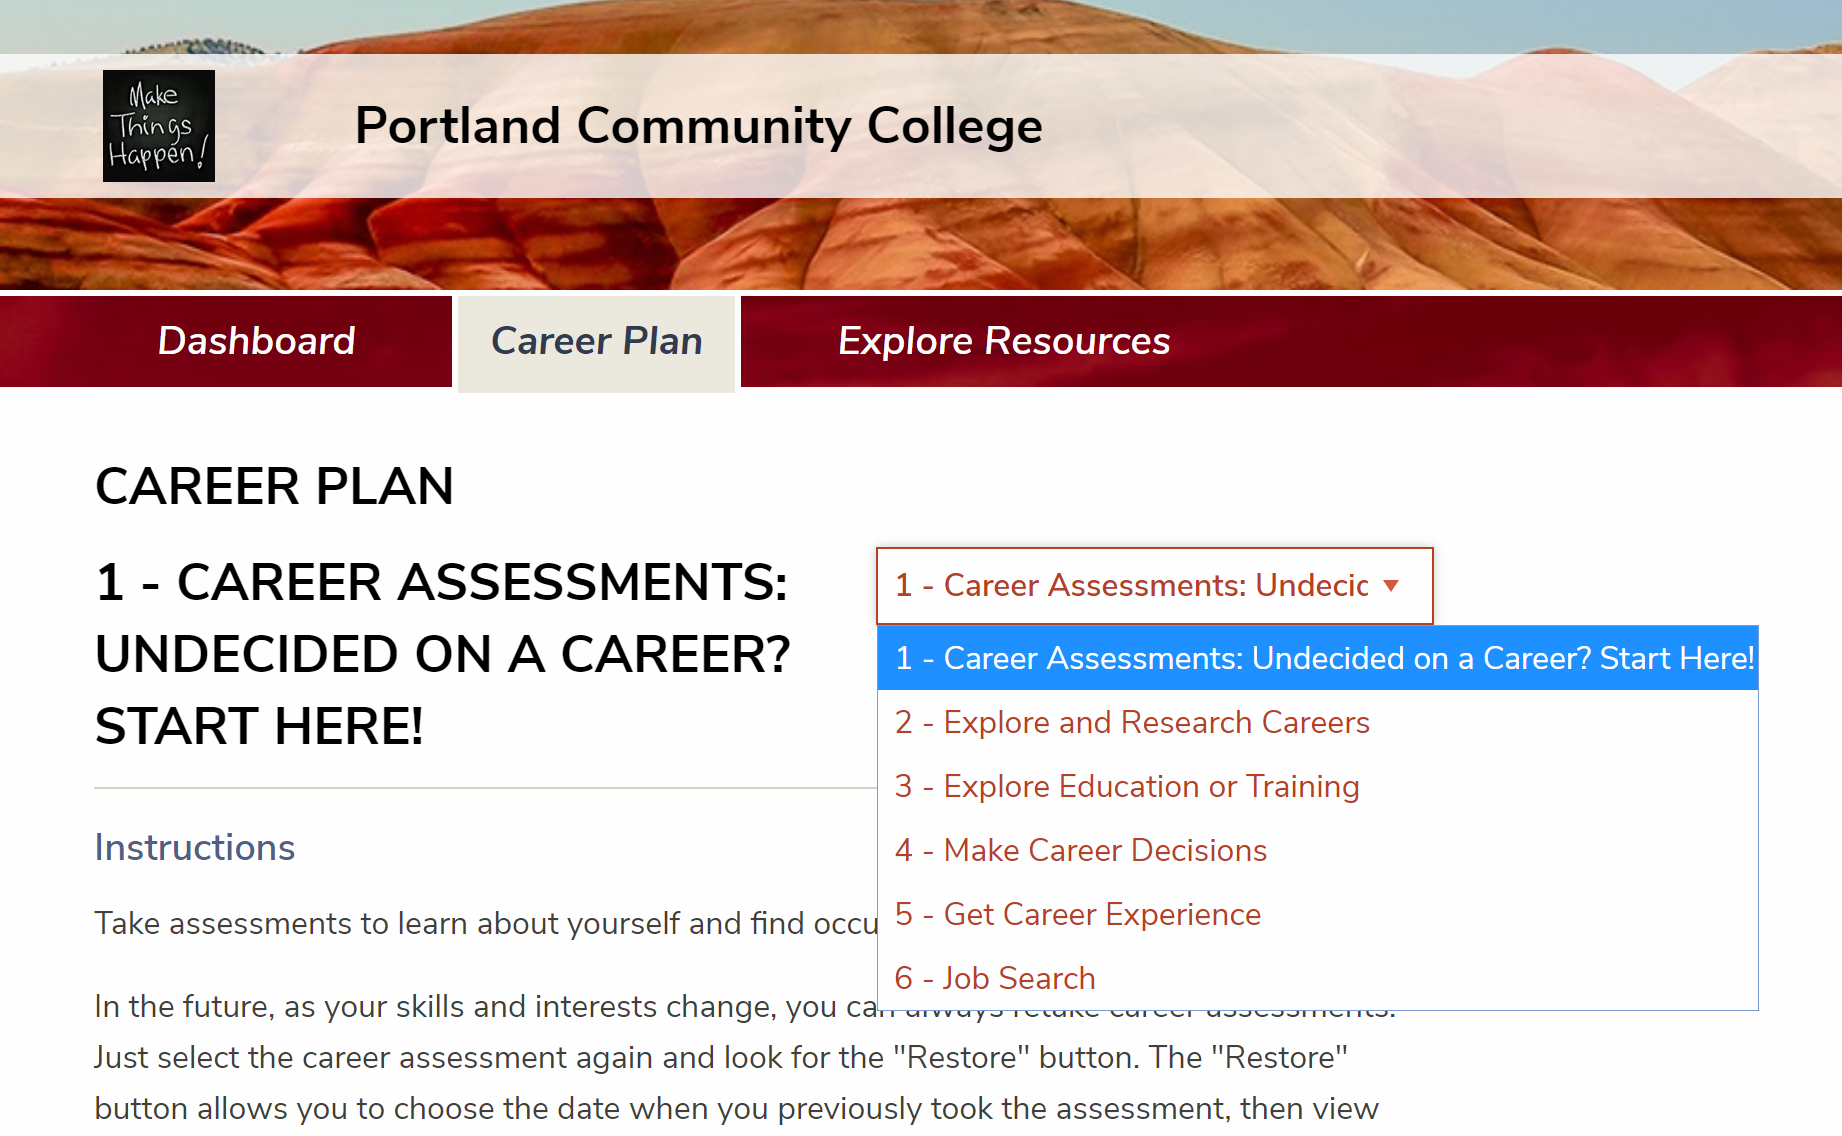 Screenshot of Career Plan tab with a dropdown menu showing topics related to choosing a career